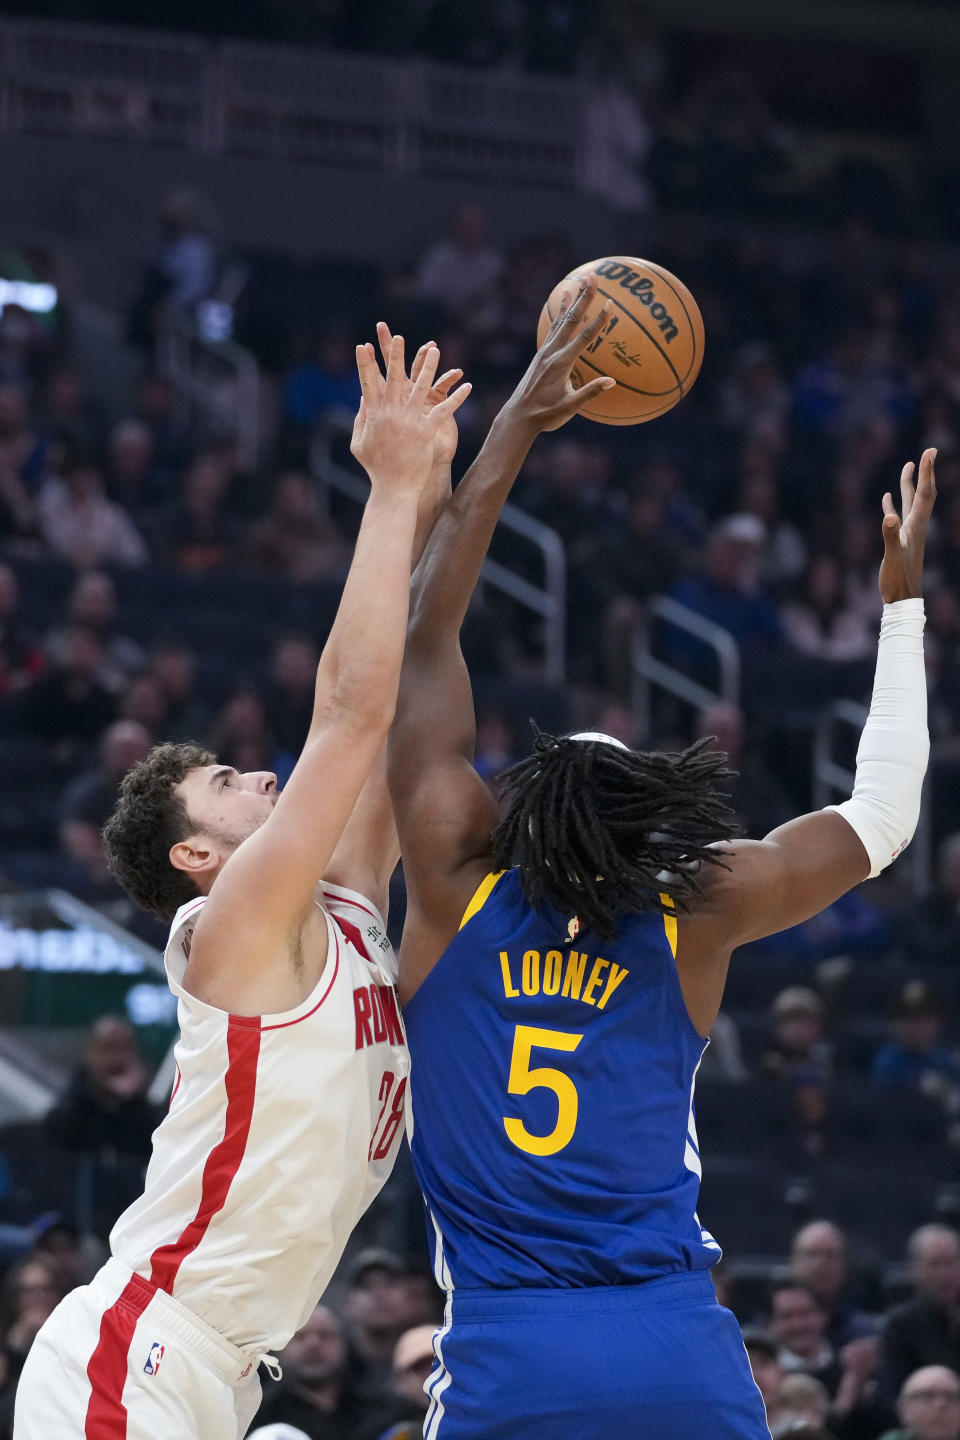 Houston Rockets center Alperen Sengun, left, and Golden State Warriors center Kevon Looney compete for possession of the ball during the first half of an NBA basketball game in San Francisco, Friday, Feb. 24, 2023. (AP Photo/Godofredo A. Vásquez)